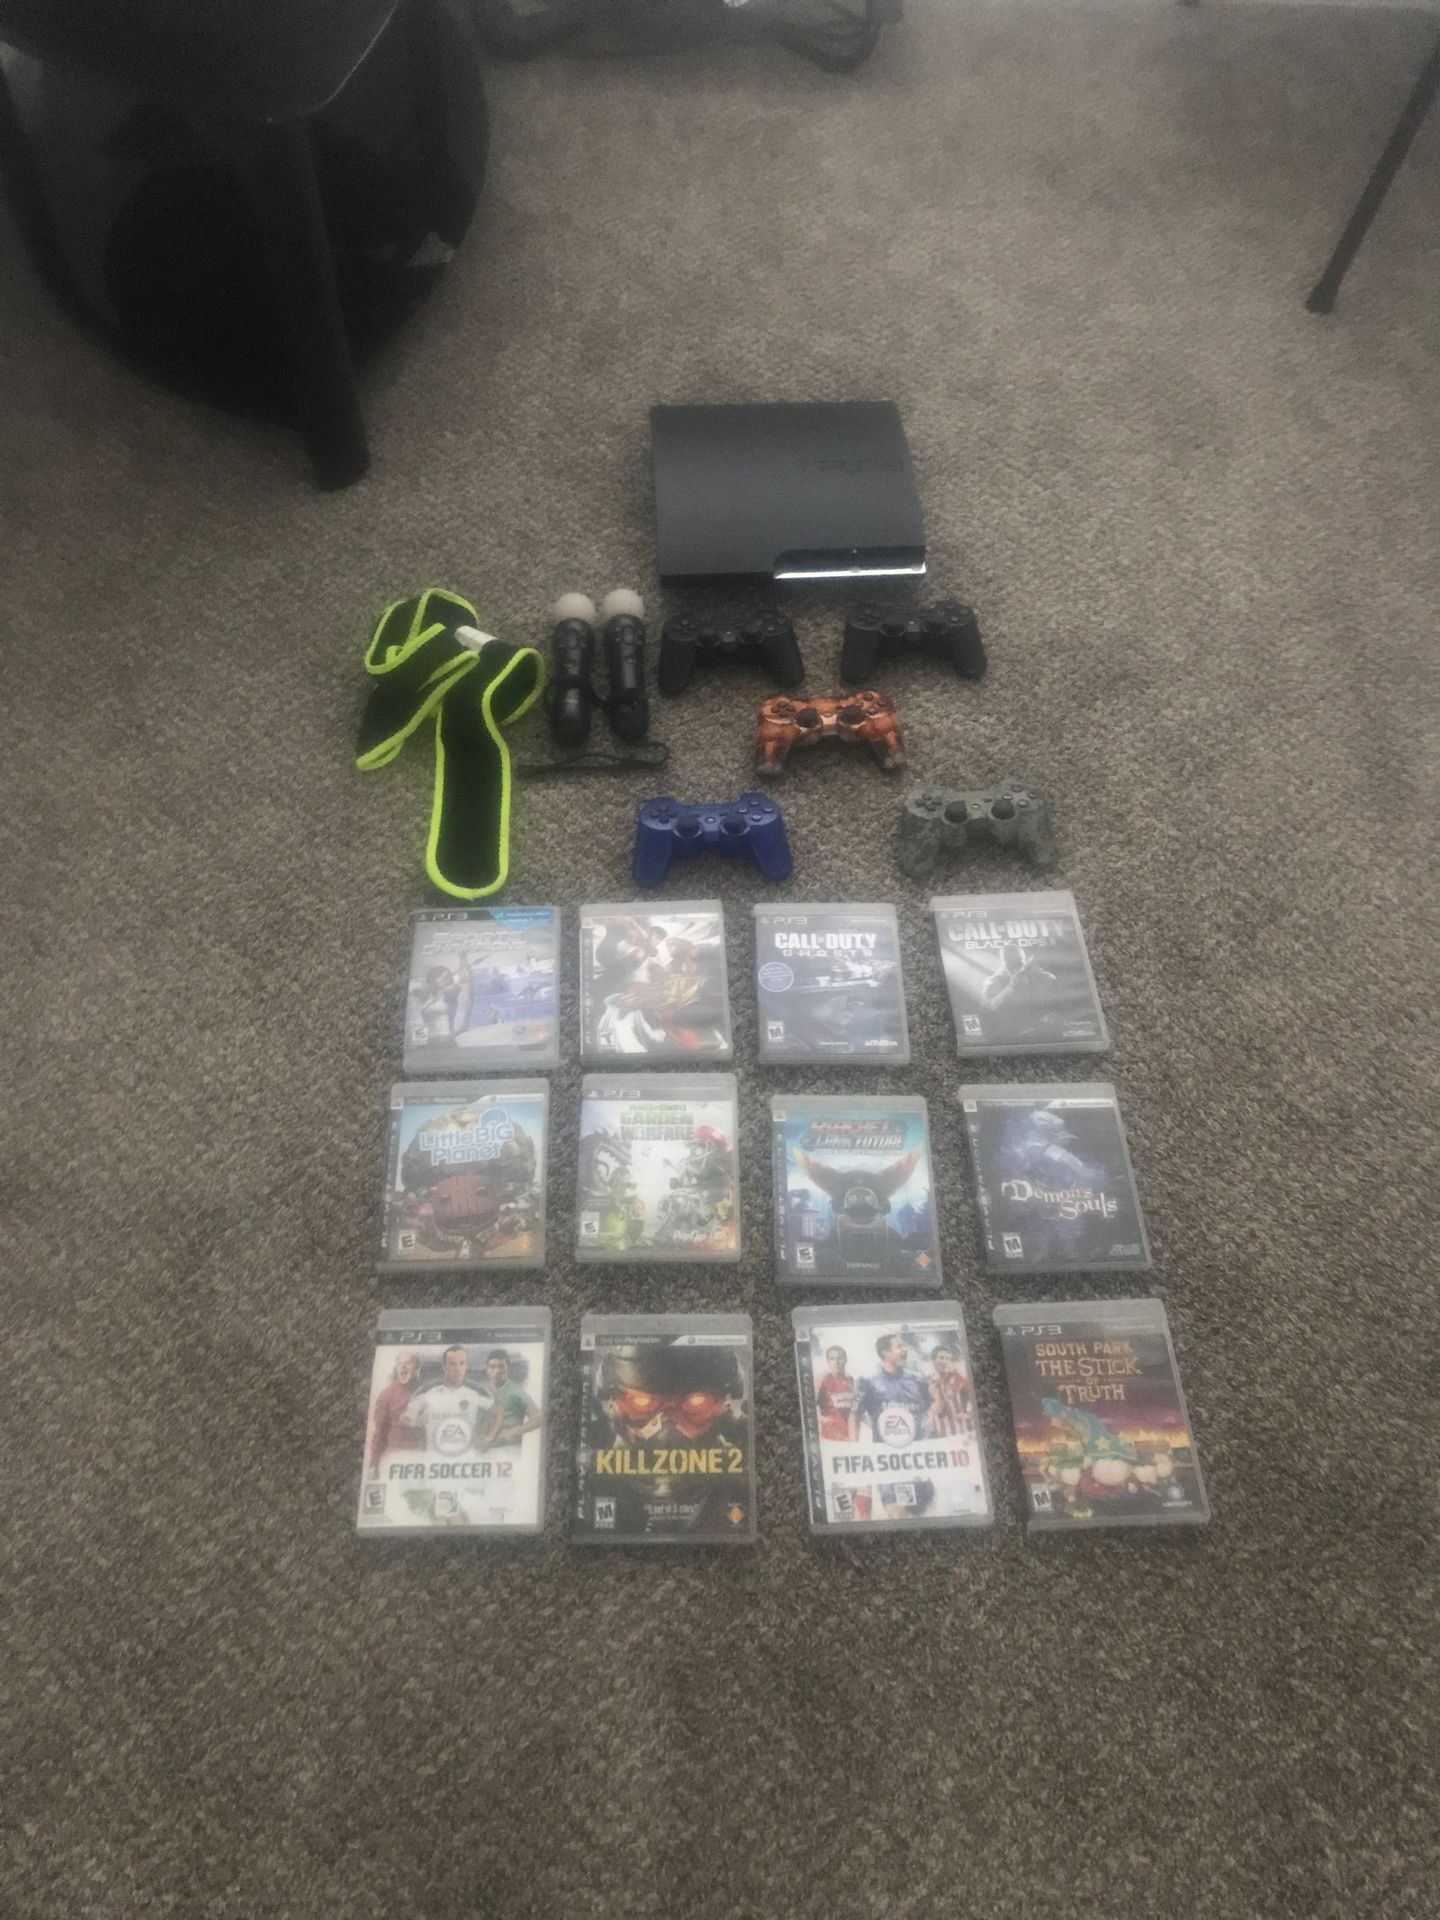 PS3 Slim with 14 games and 5 controllers